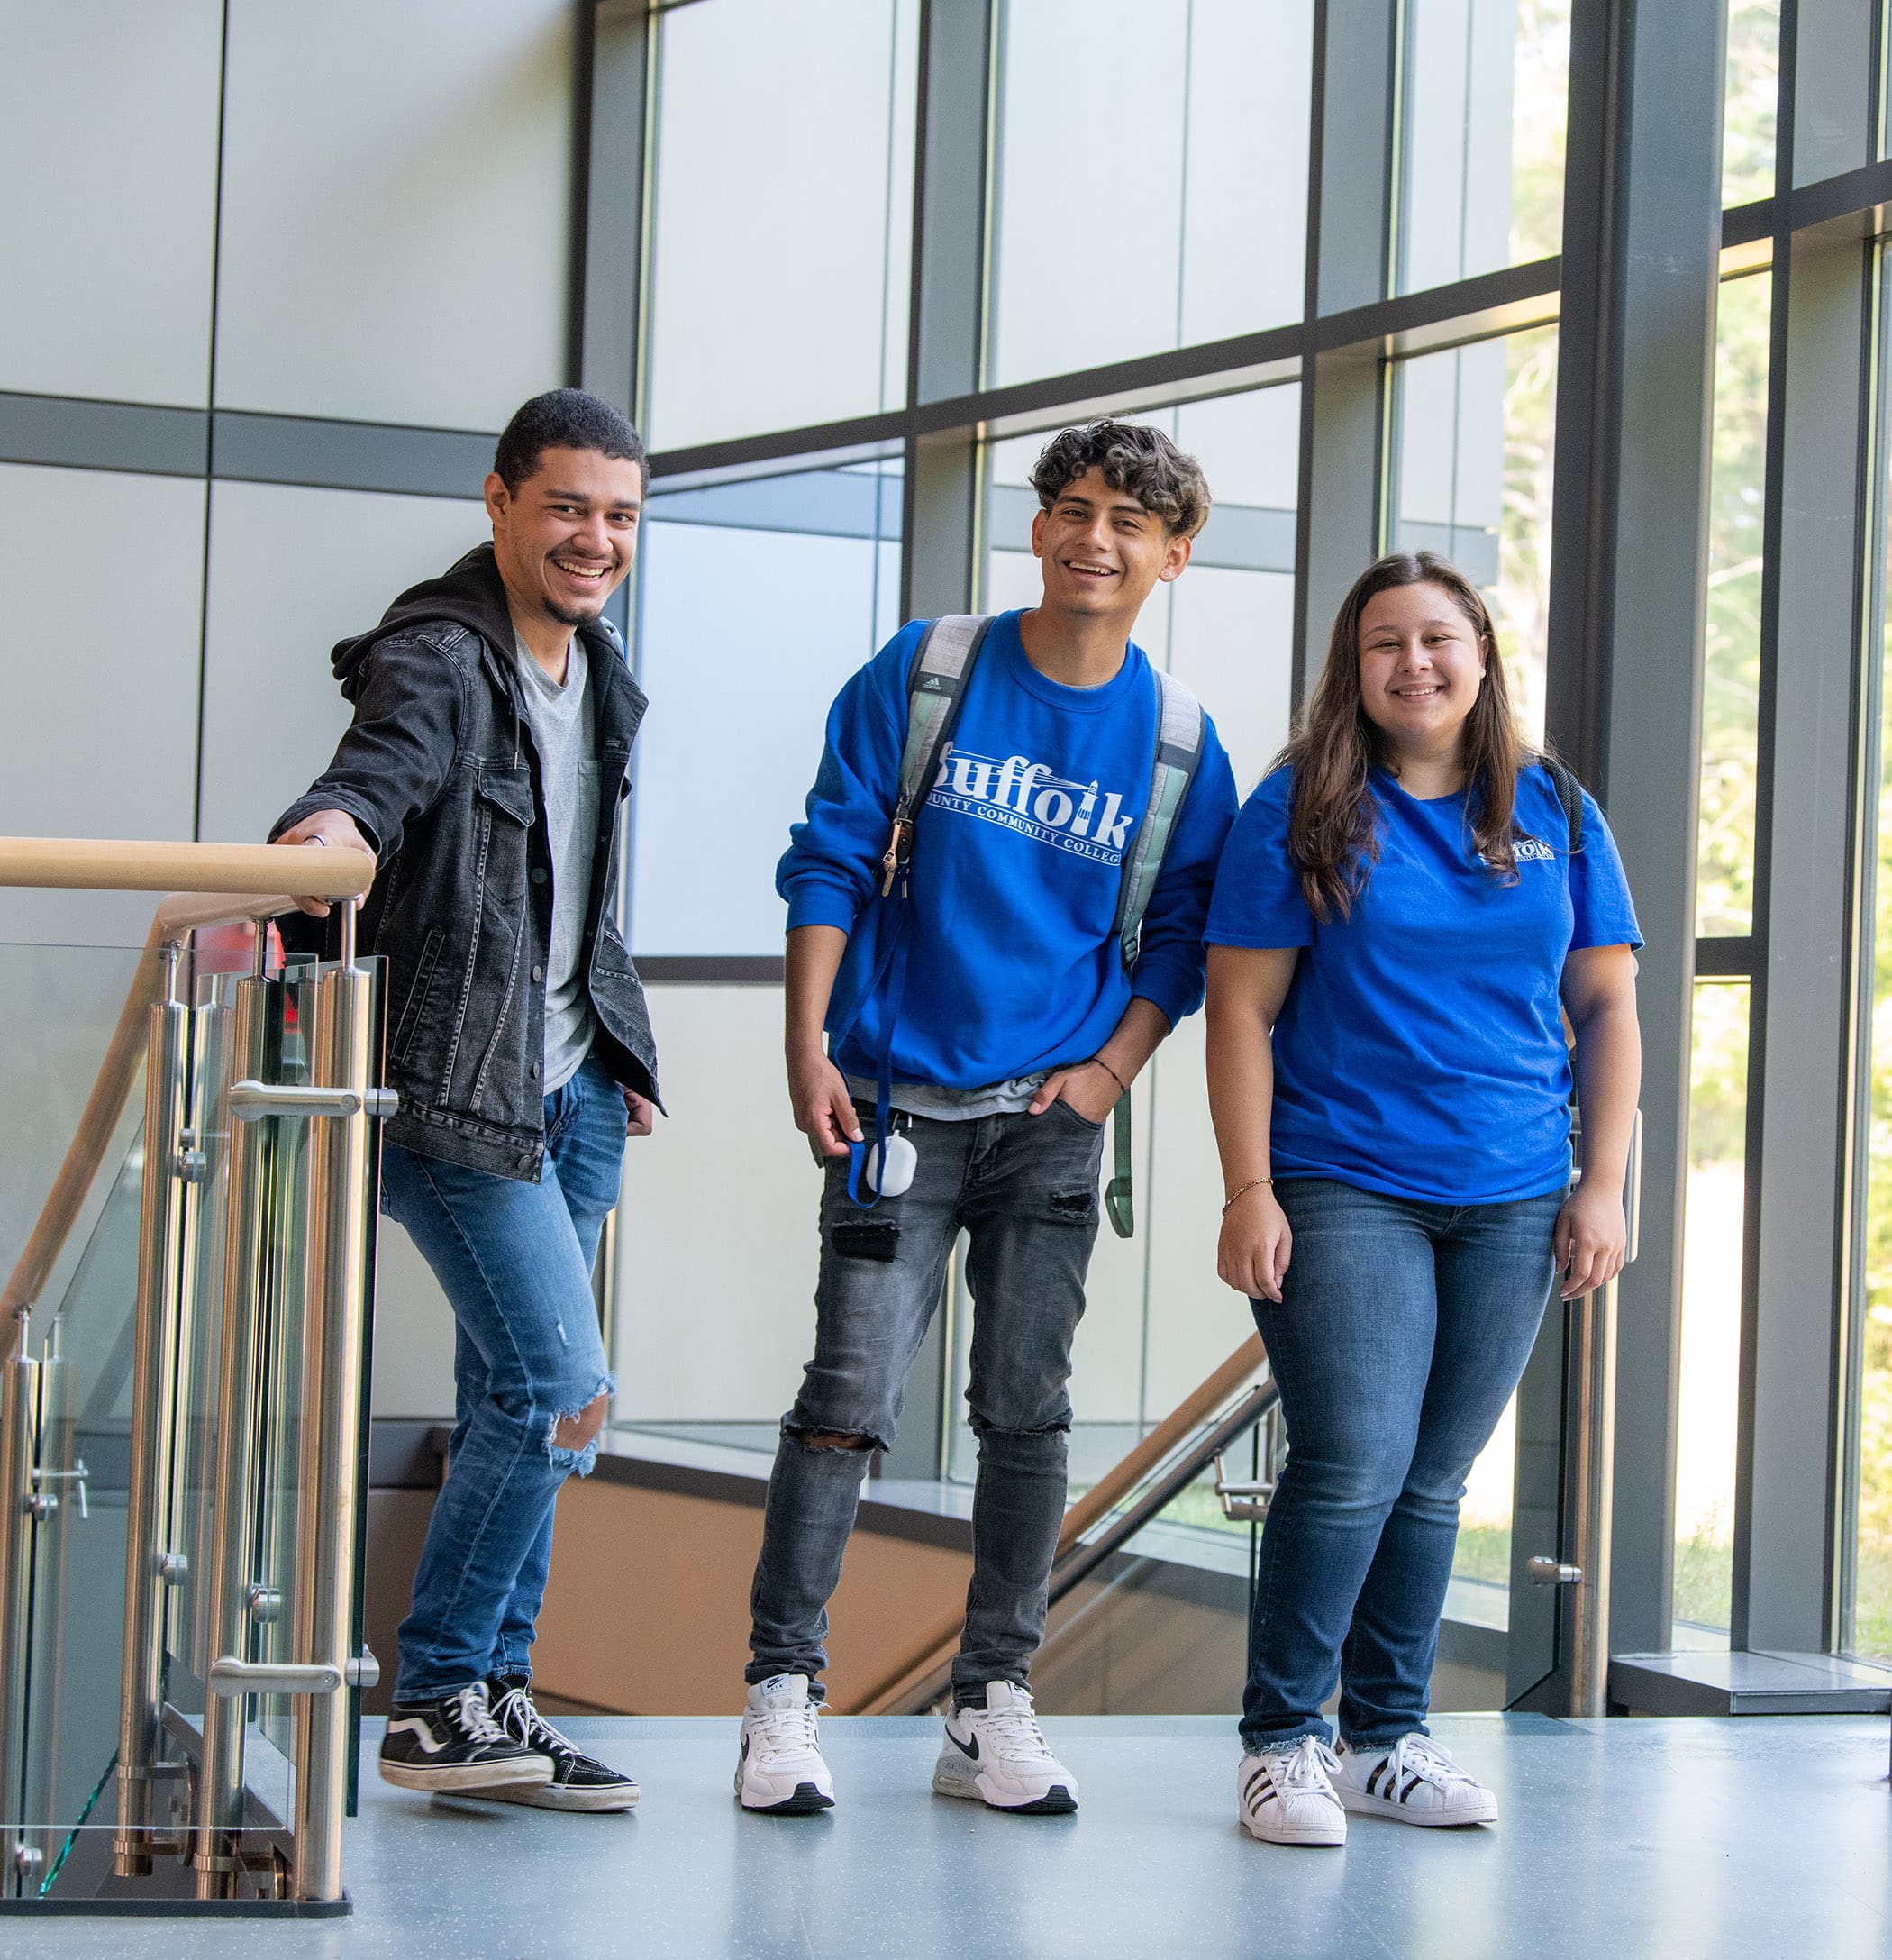 Three Suffolk students standing at the top of a staircase in blue shirts